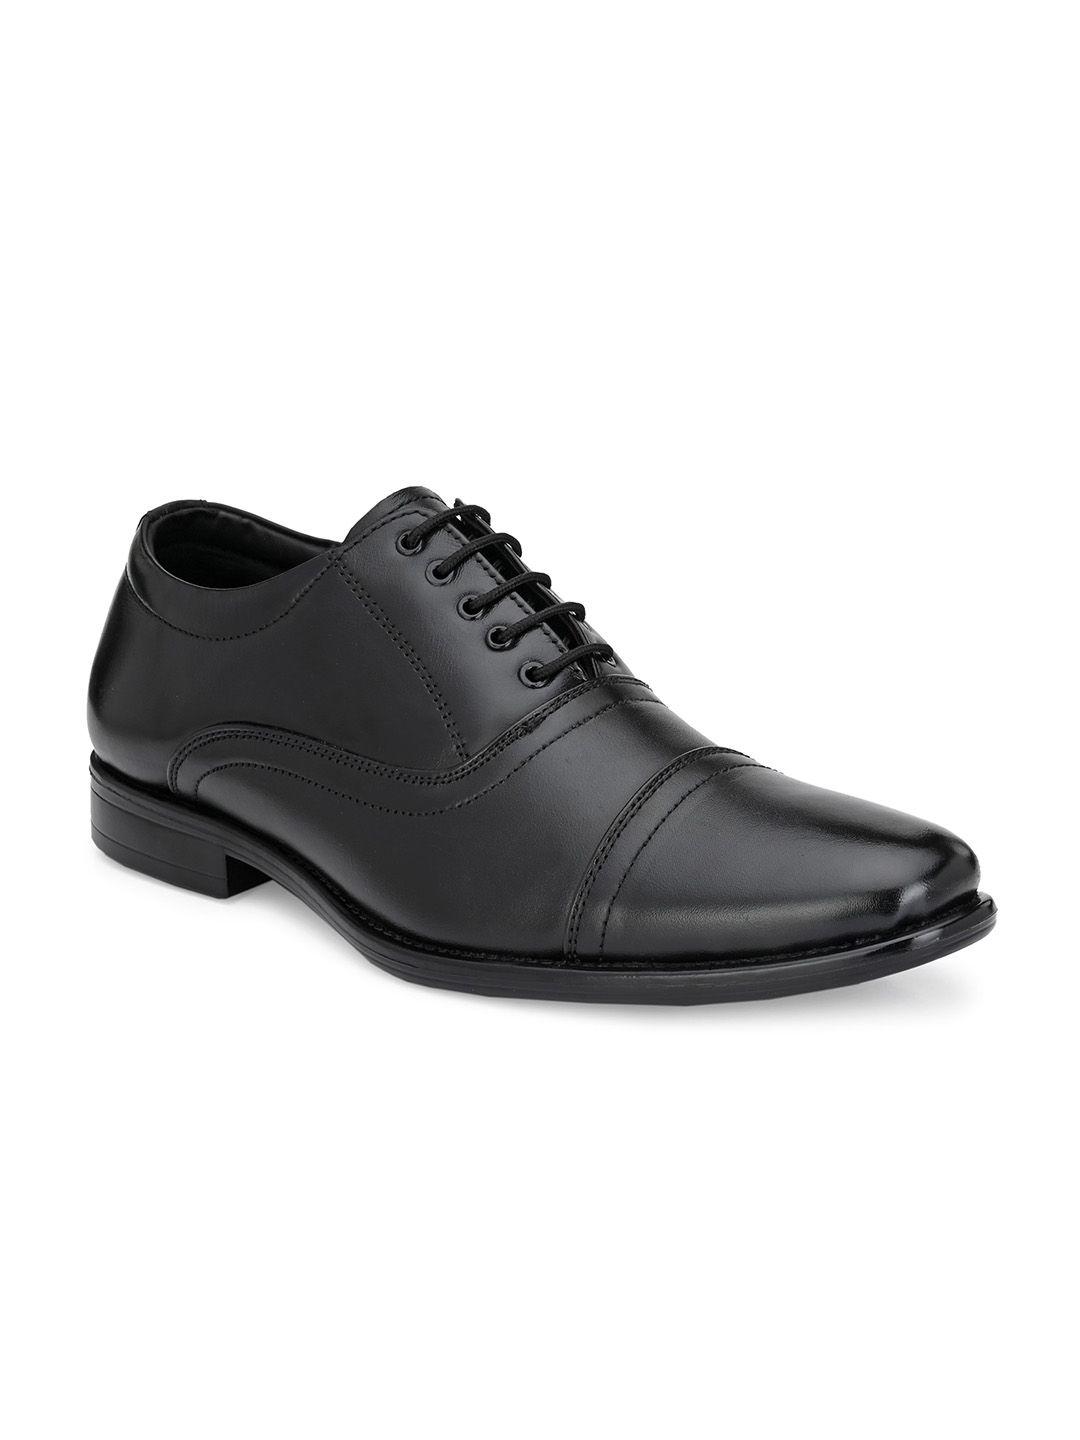 eego italy men genuine leather formal oxford shoes